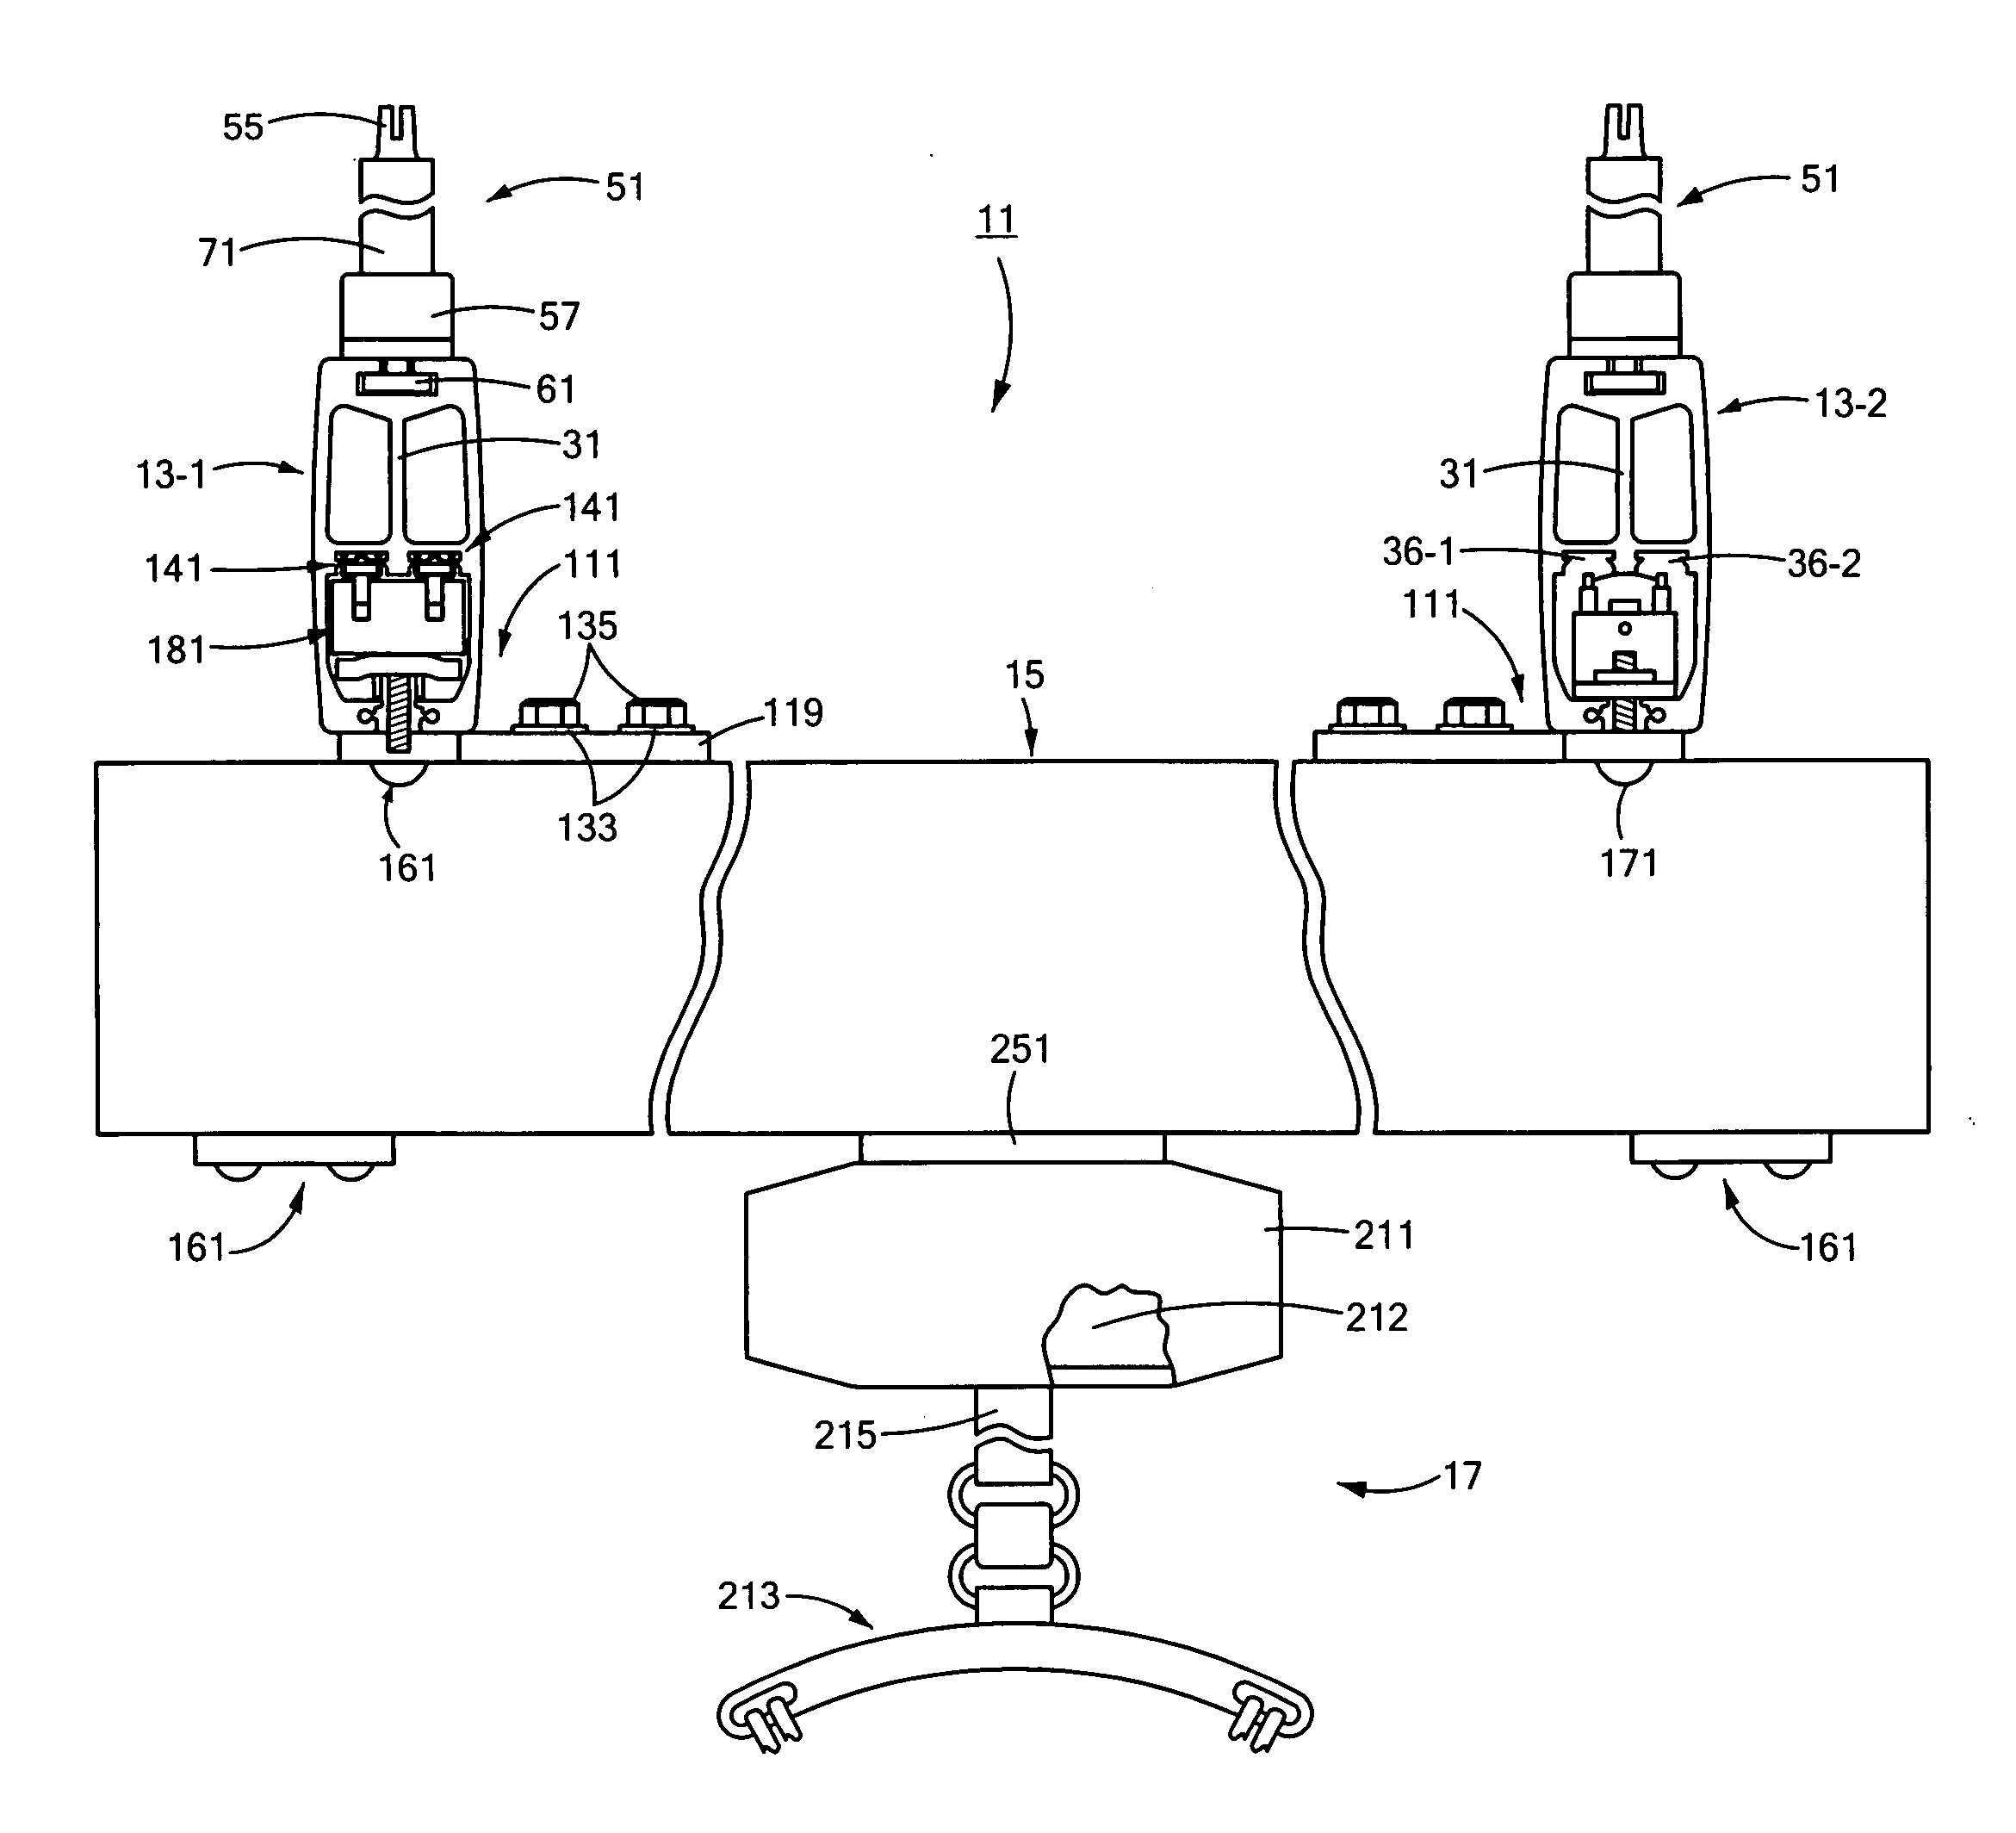 Patient positioning system and rail for use therein